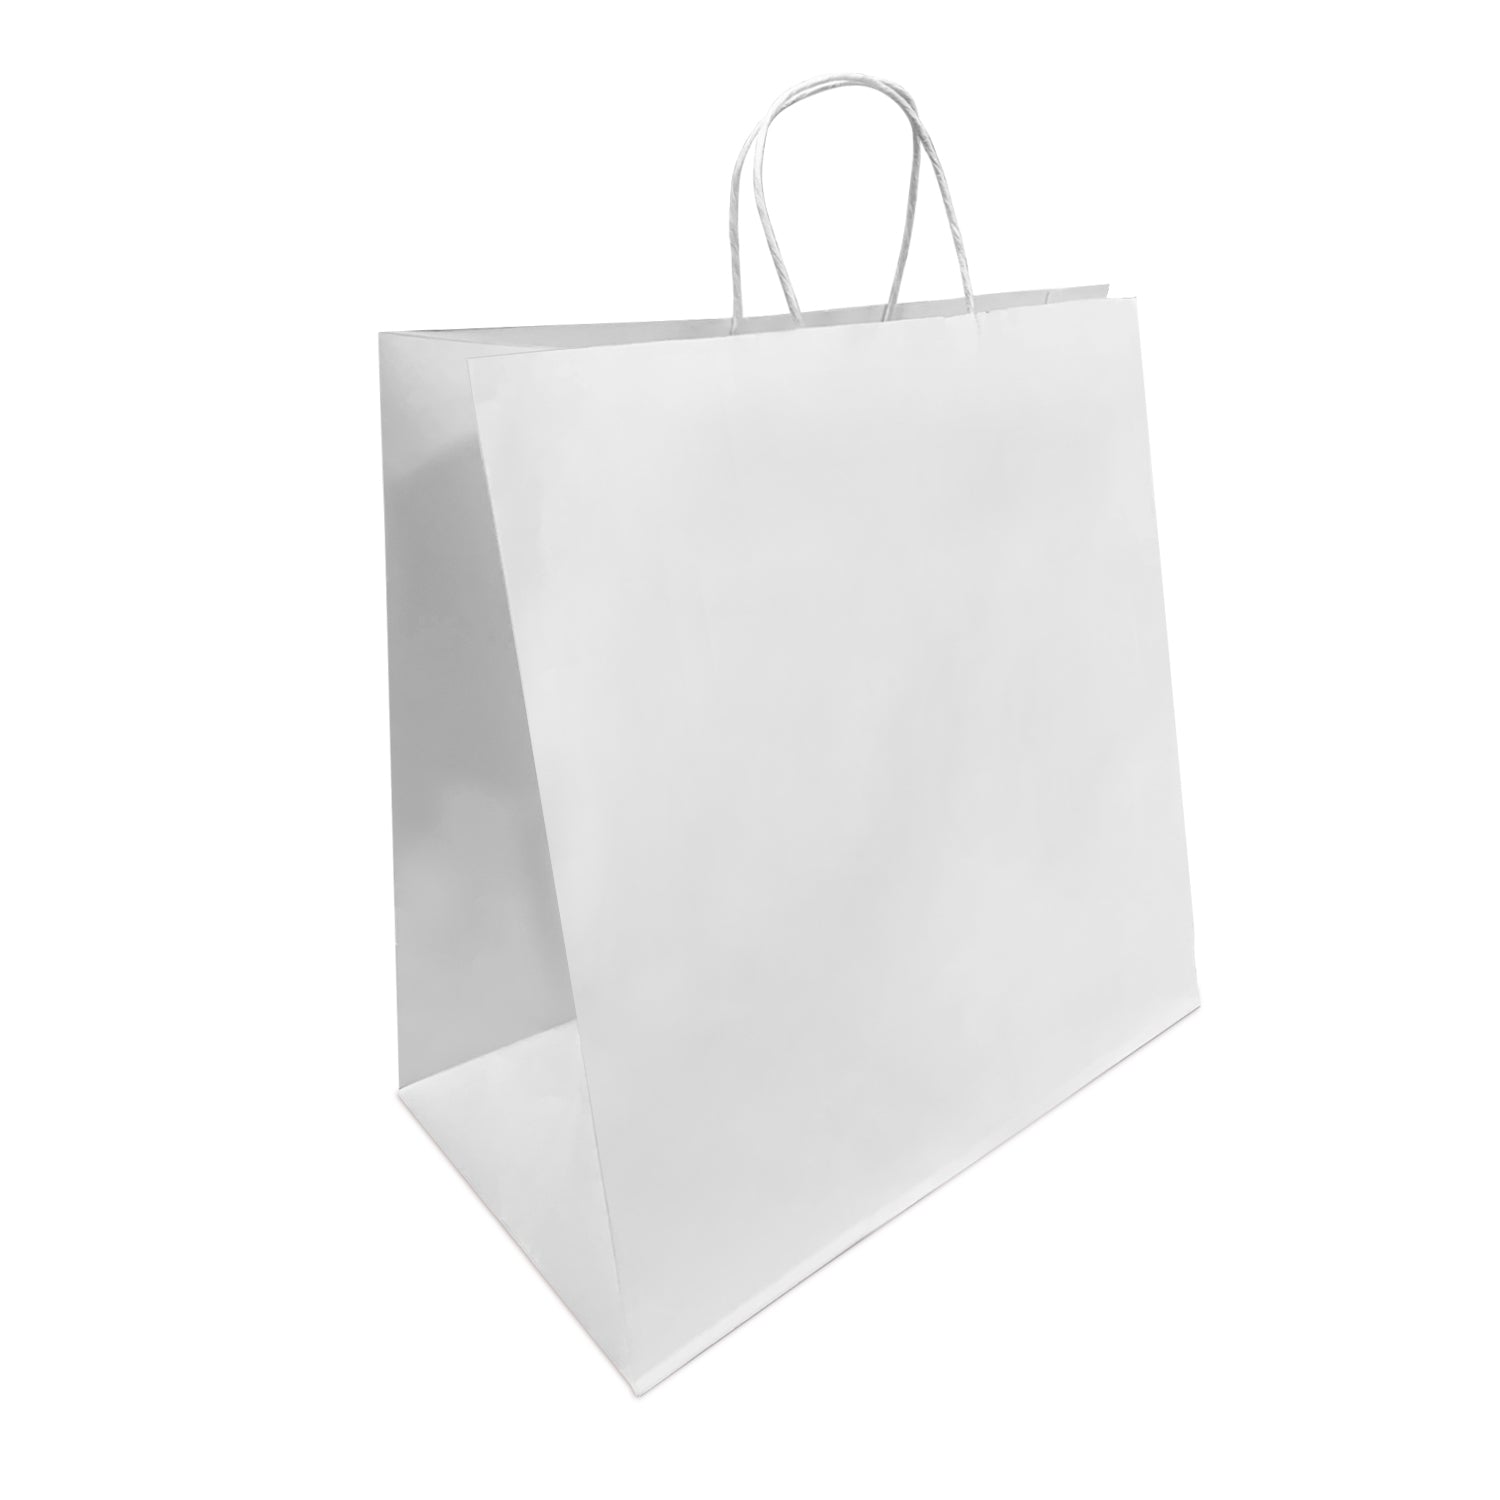 200 Pcs, Tiger, 14x8x14 inches, White Kraft Paper Bags, with Twisted Handle